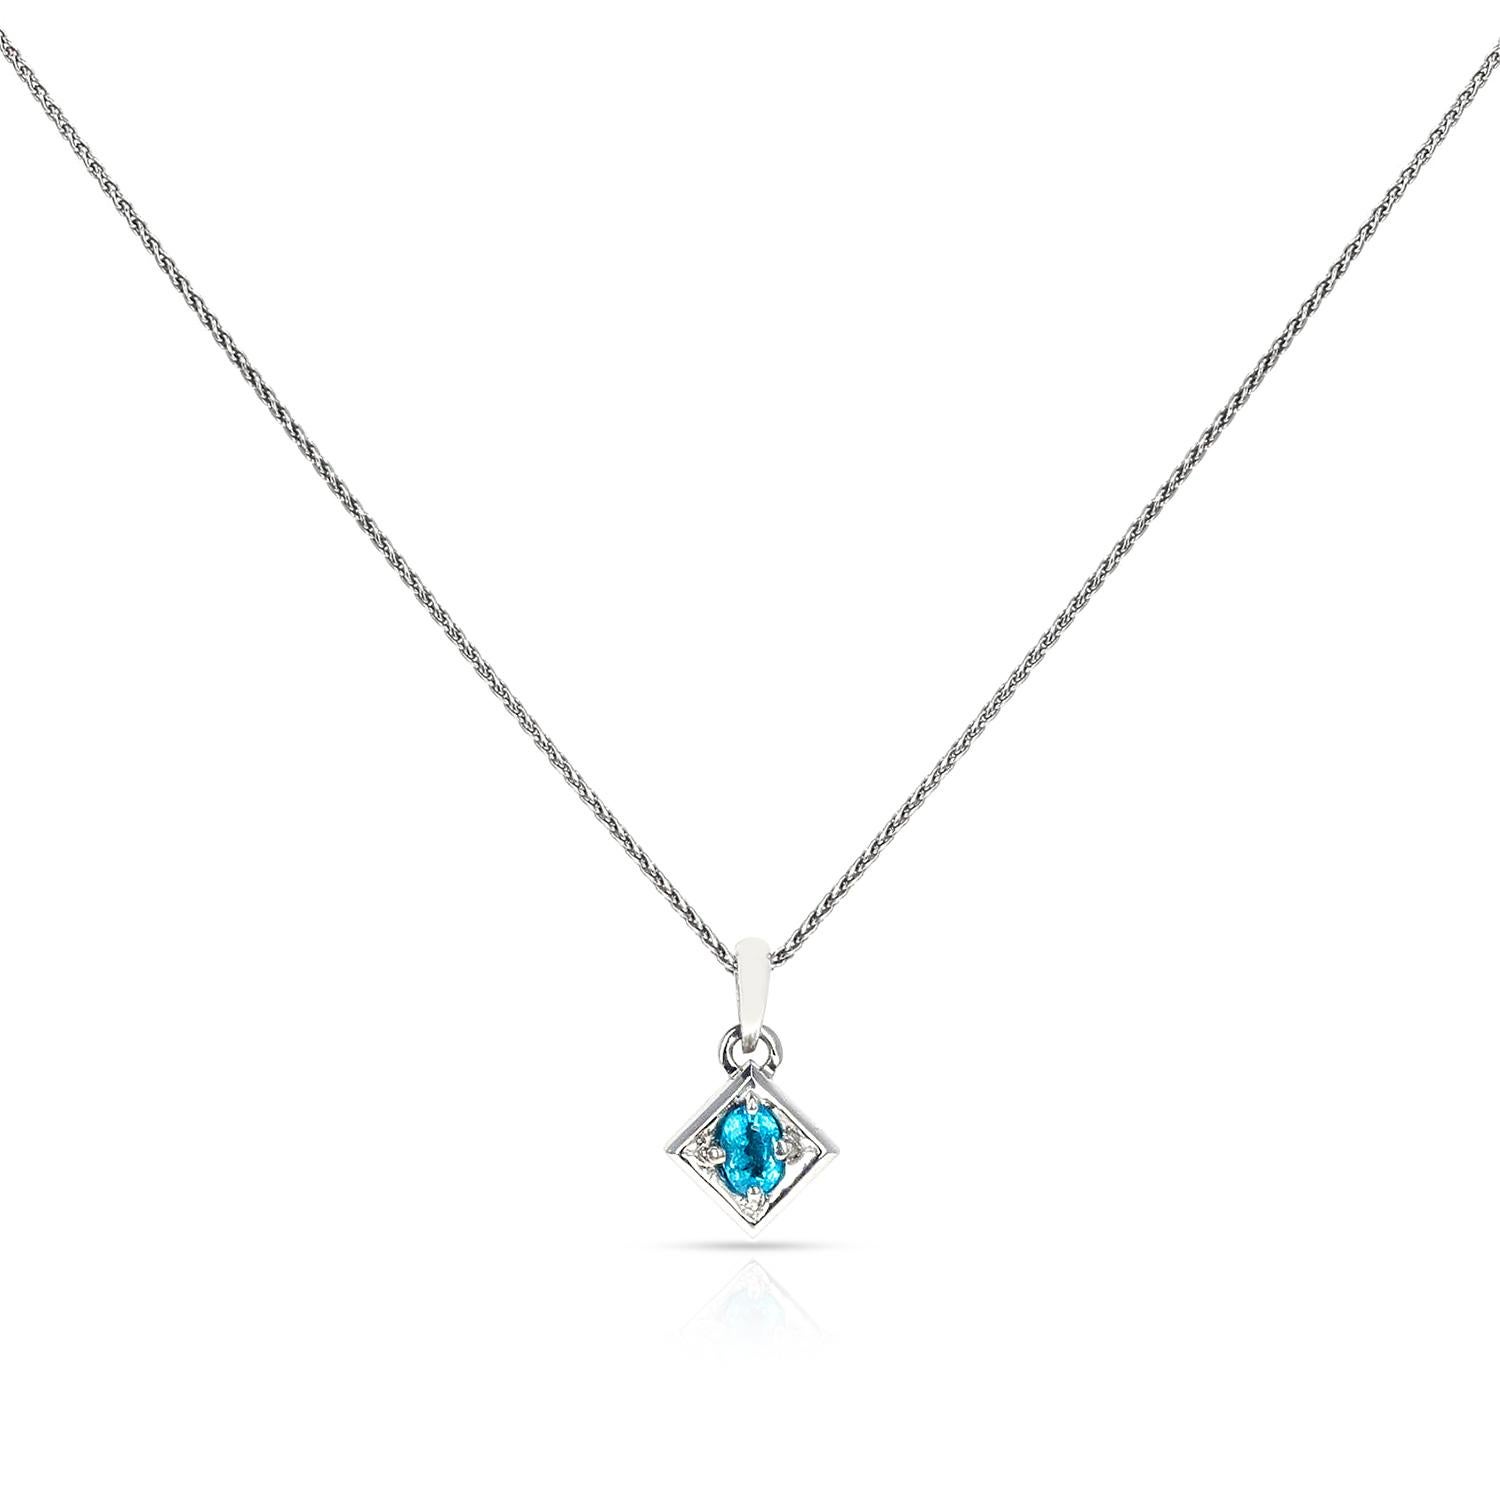 A GIA Certified 0.29 ct. Brazilian Paraiba Tourmaline Pendant Necklace. The total weight of the pendant is 2.57 grams. 
